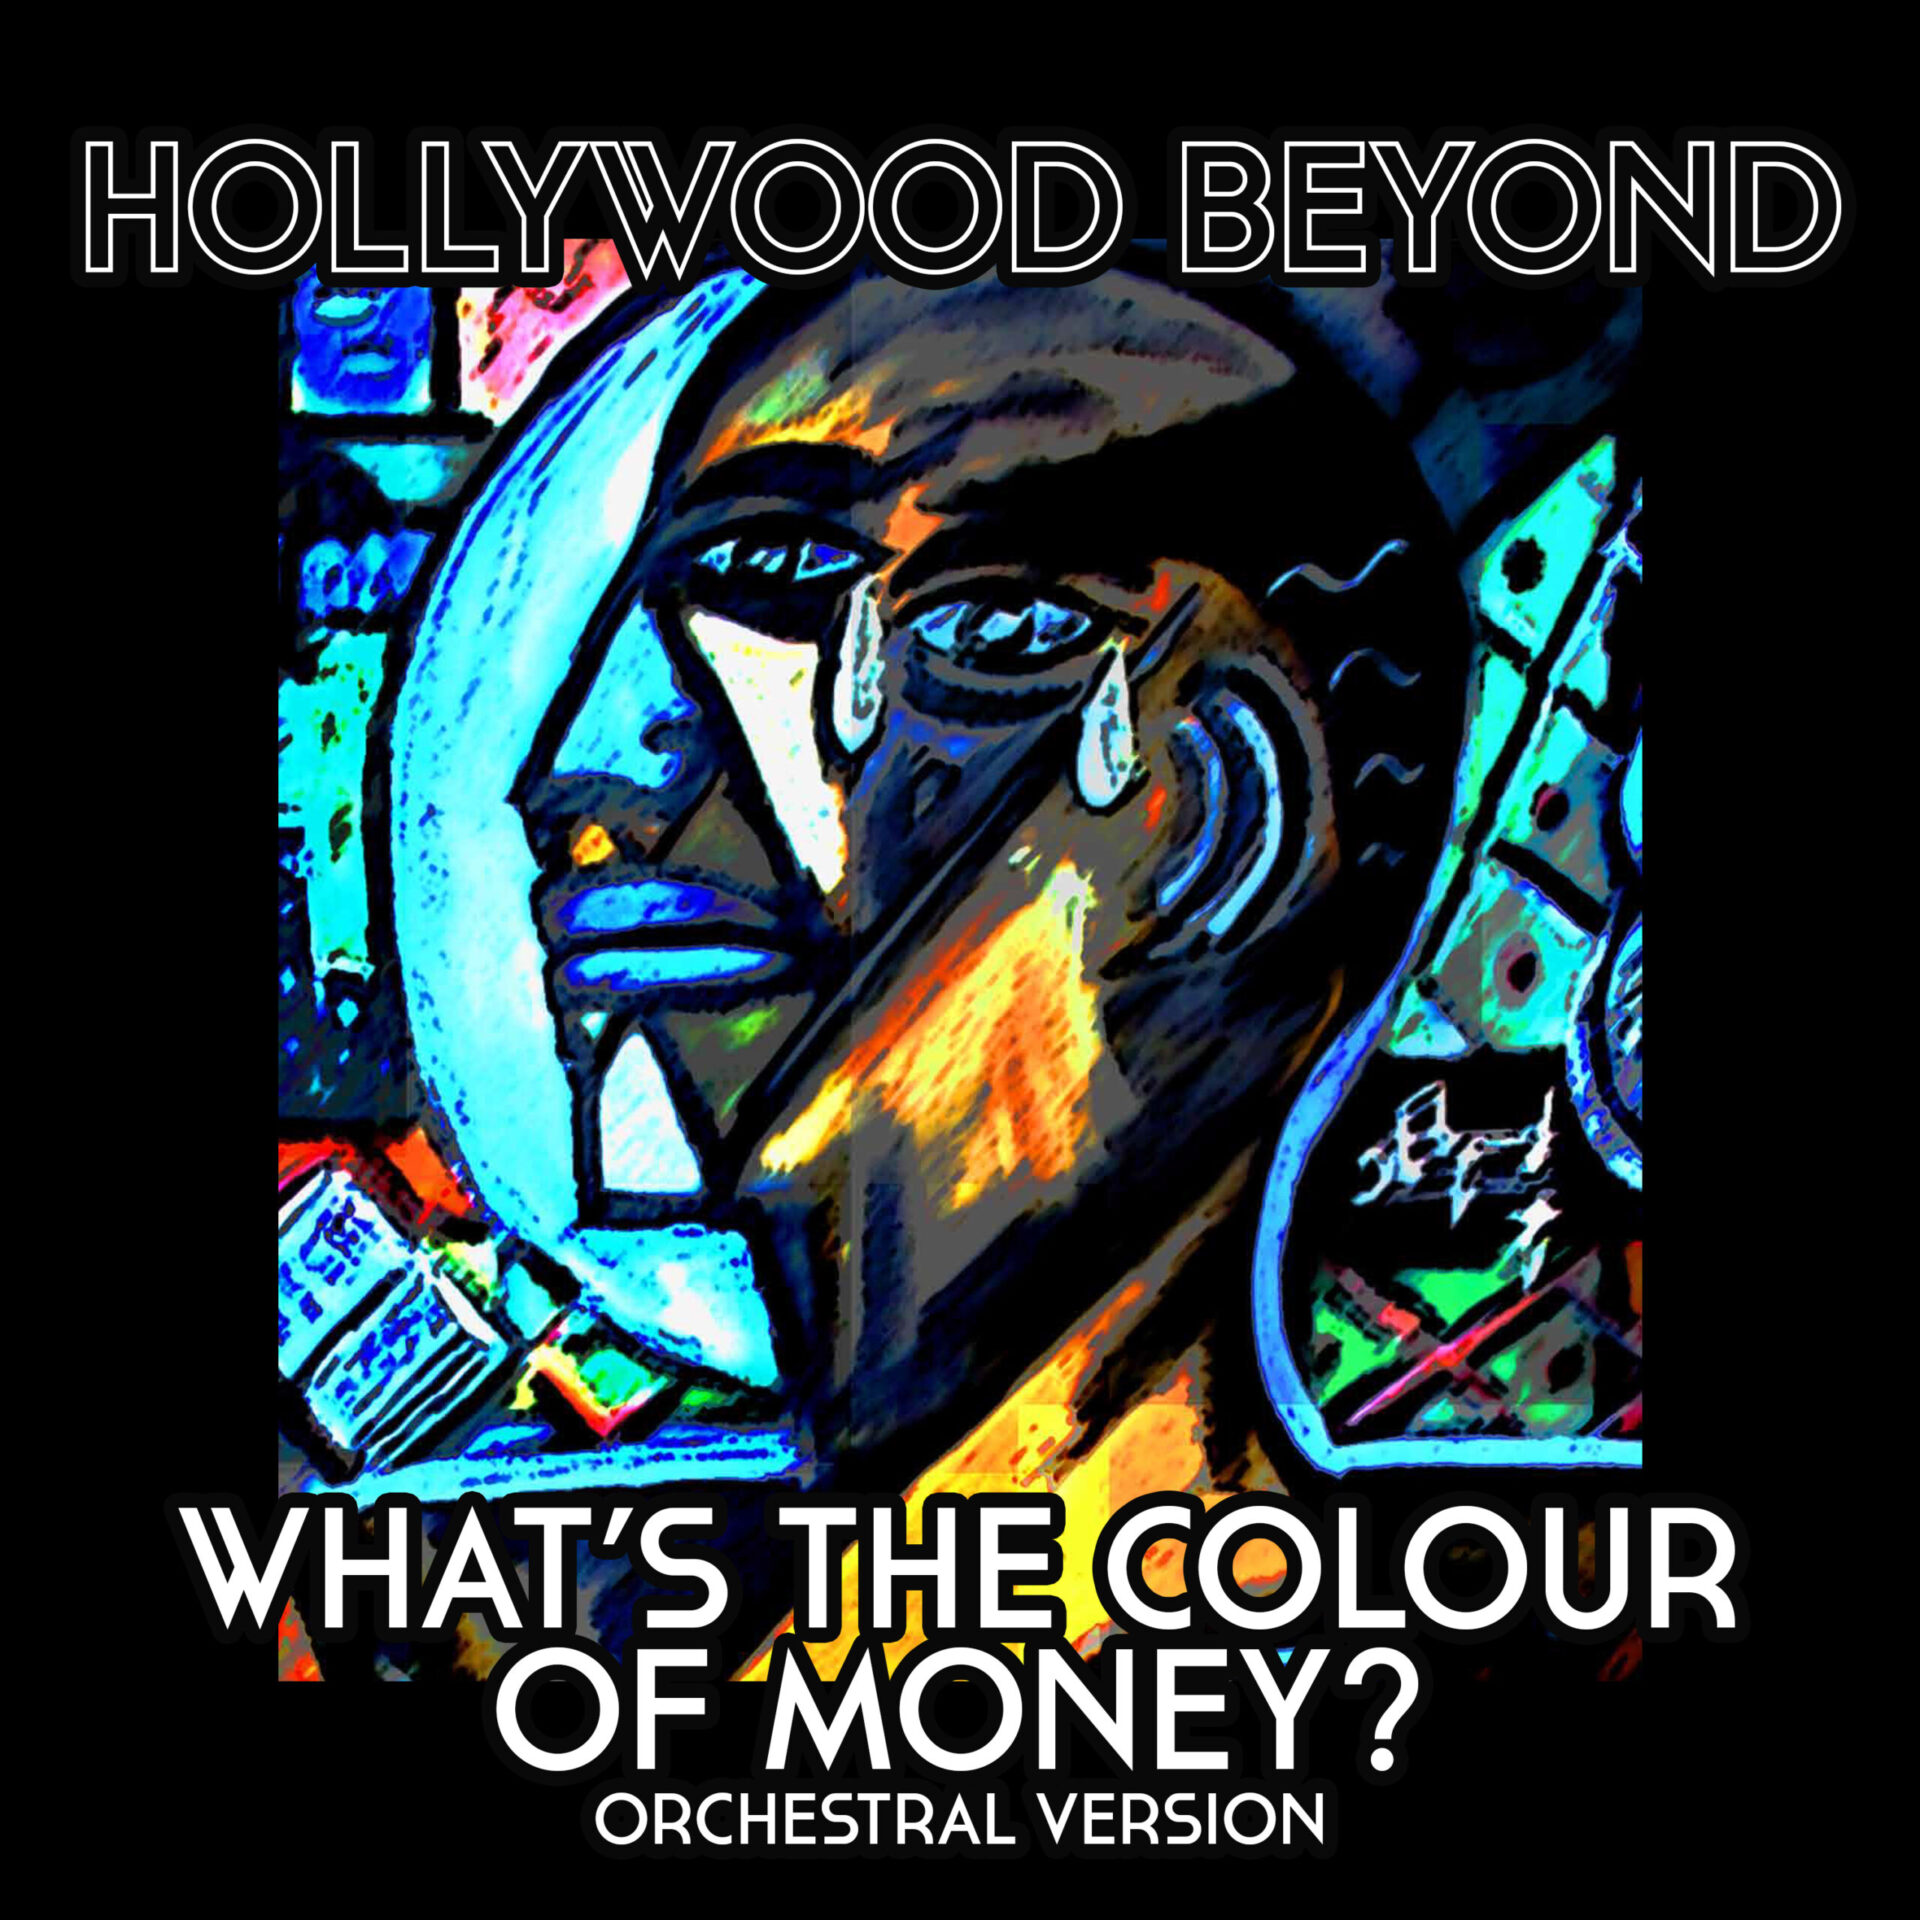 Hollywood Beyond's song Whats The Colour Of Money (Orchestral Version) cover art